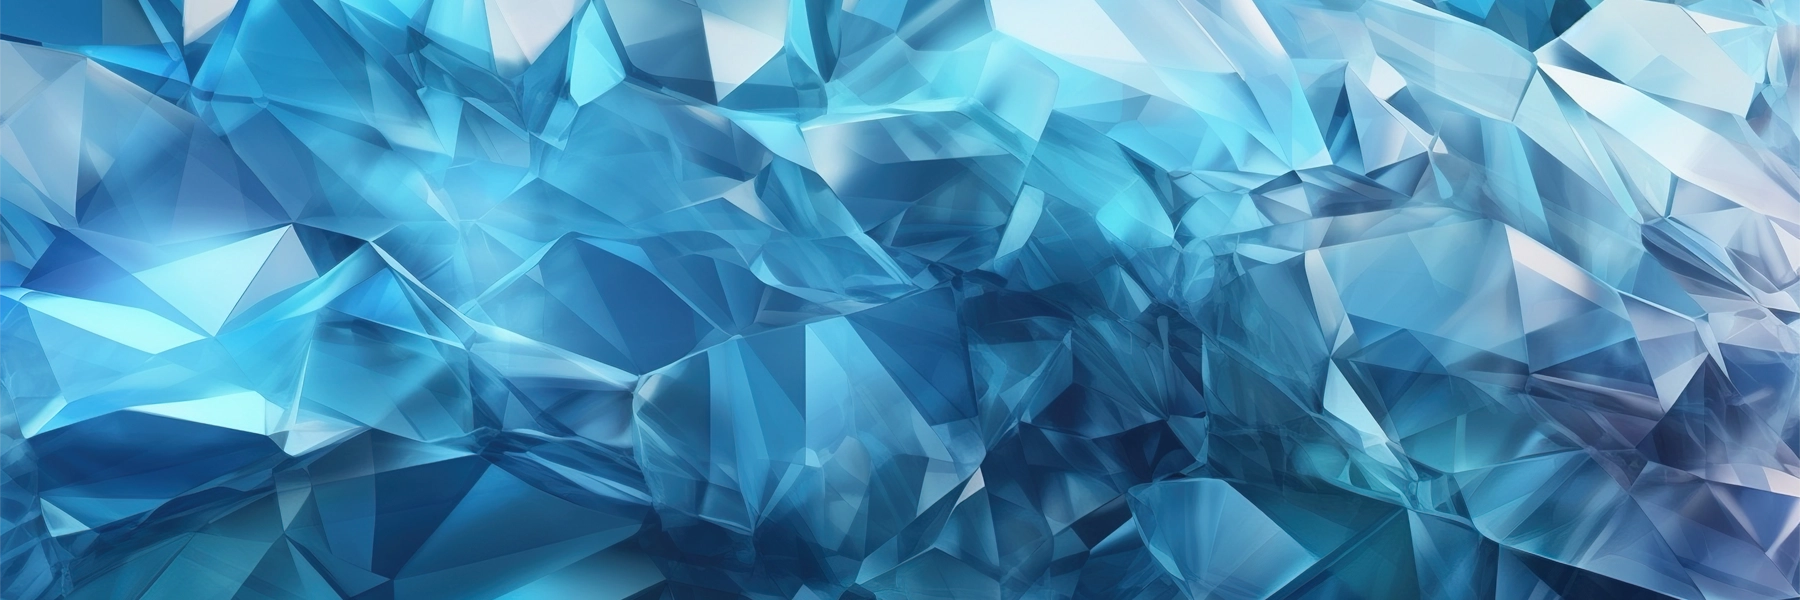 Digital rendering of a complicated blue jewel with many facets